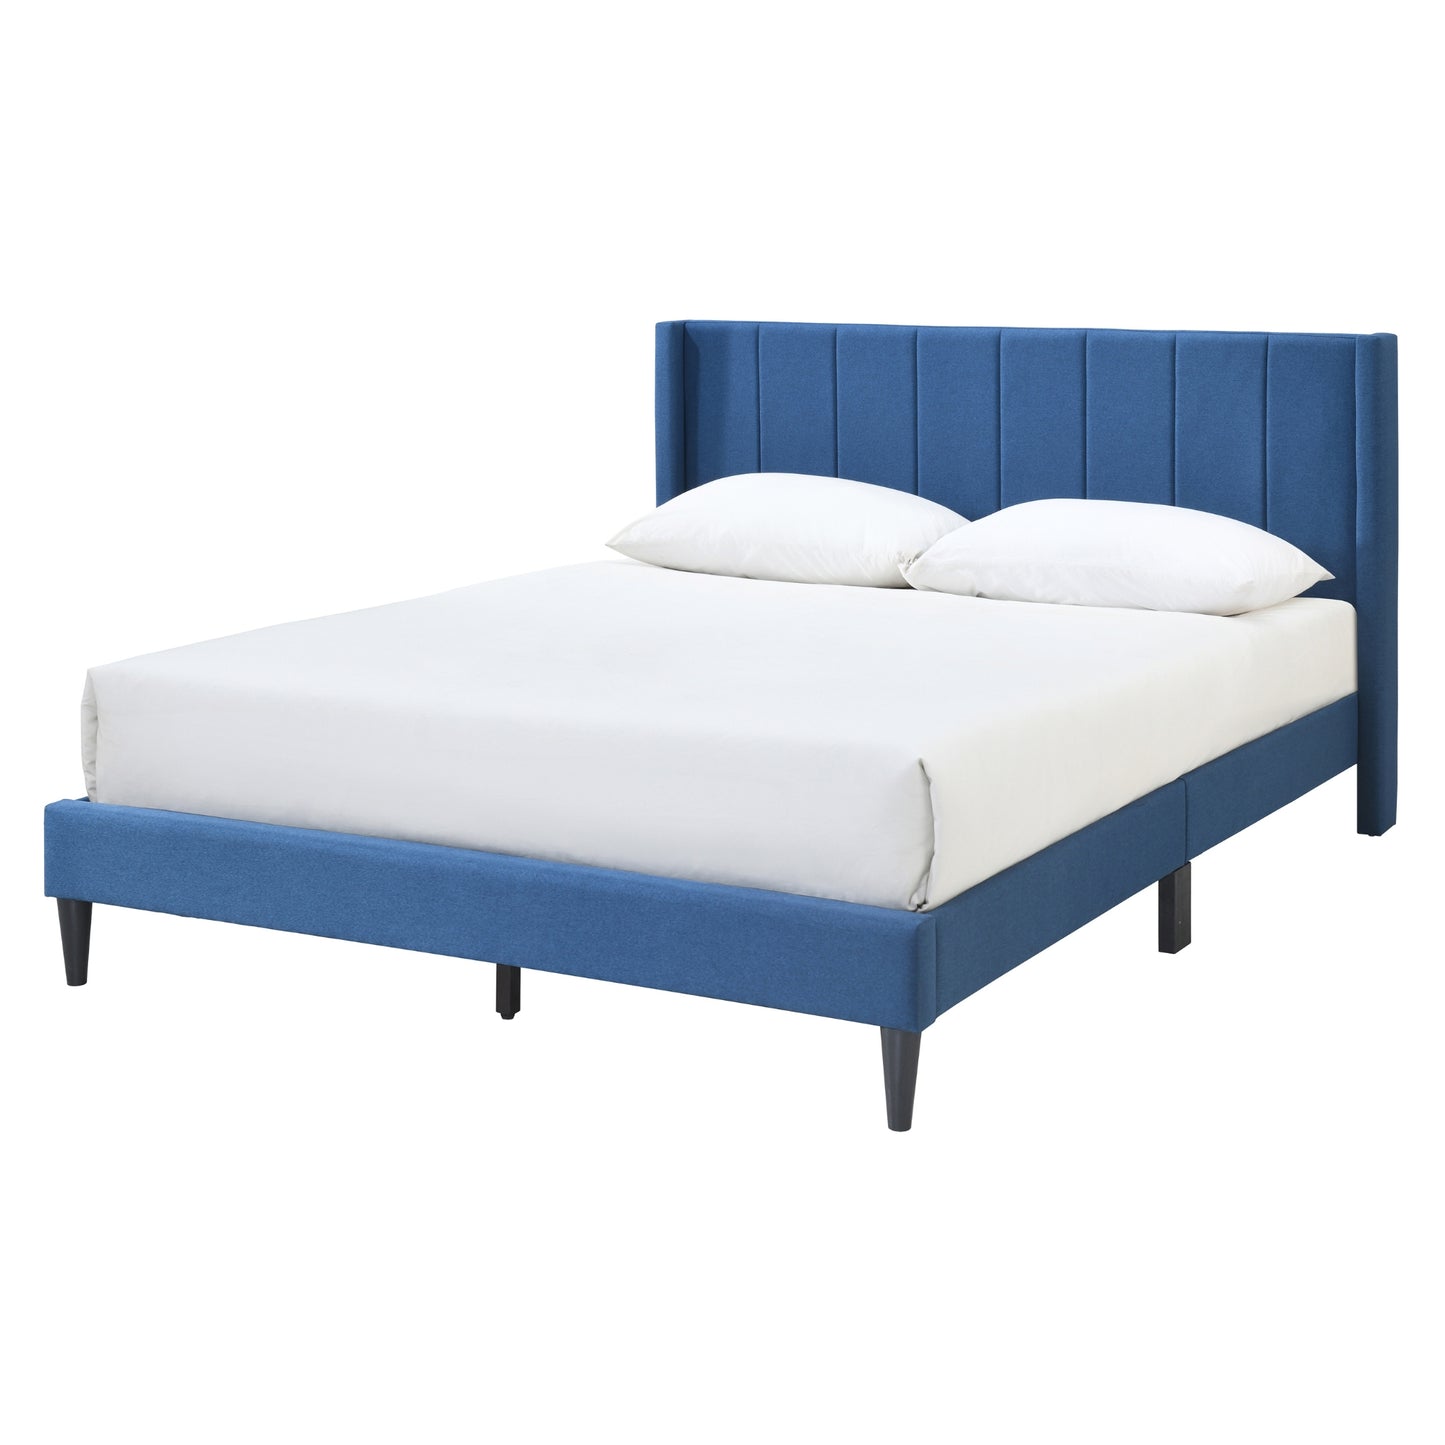 Samson King Bed Winged Headboard Fabric Upholstered - Blue